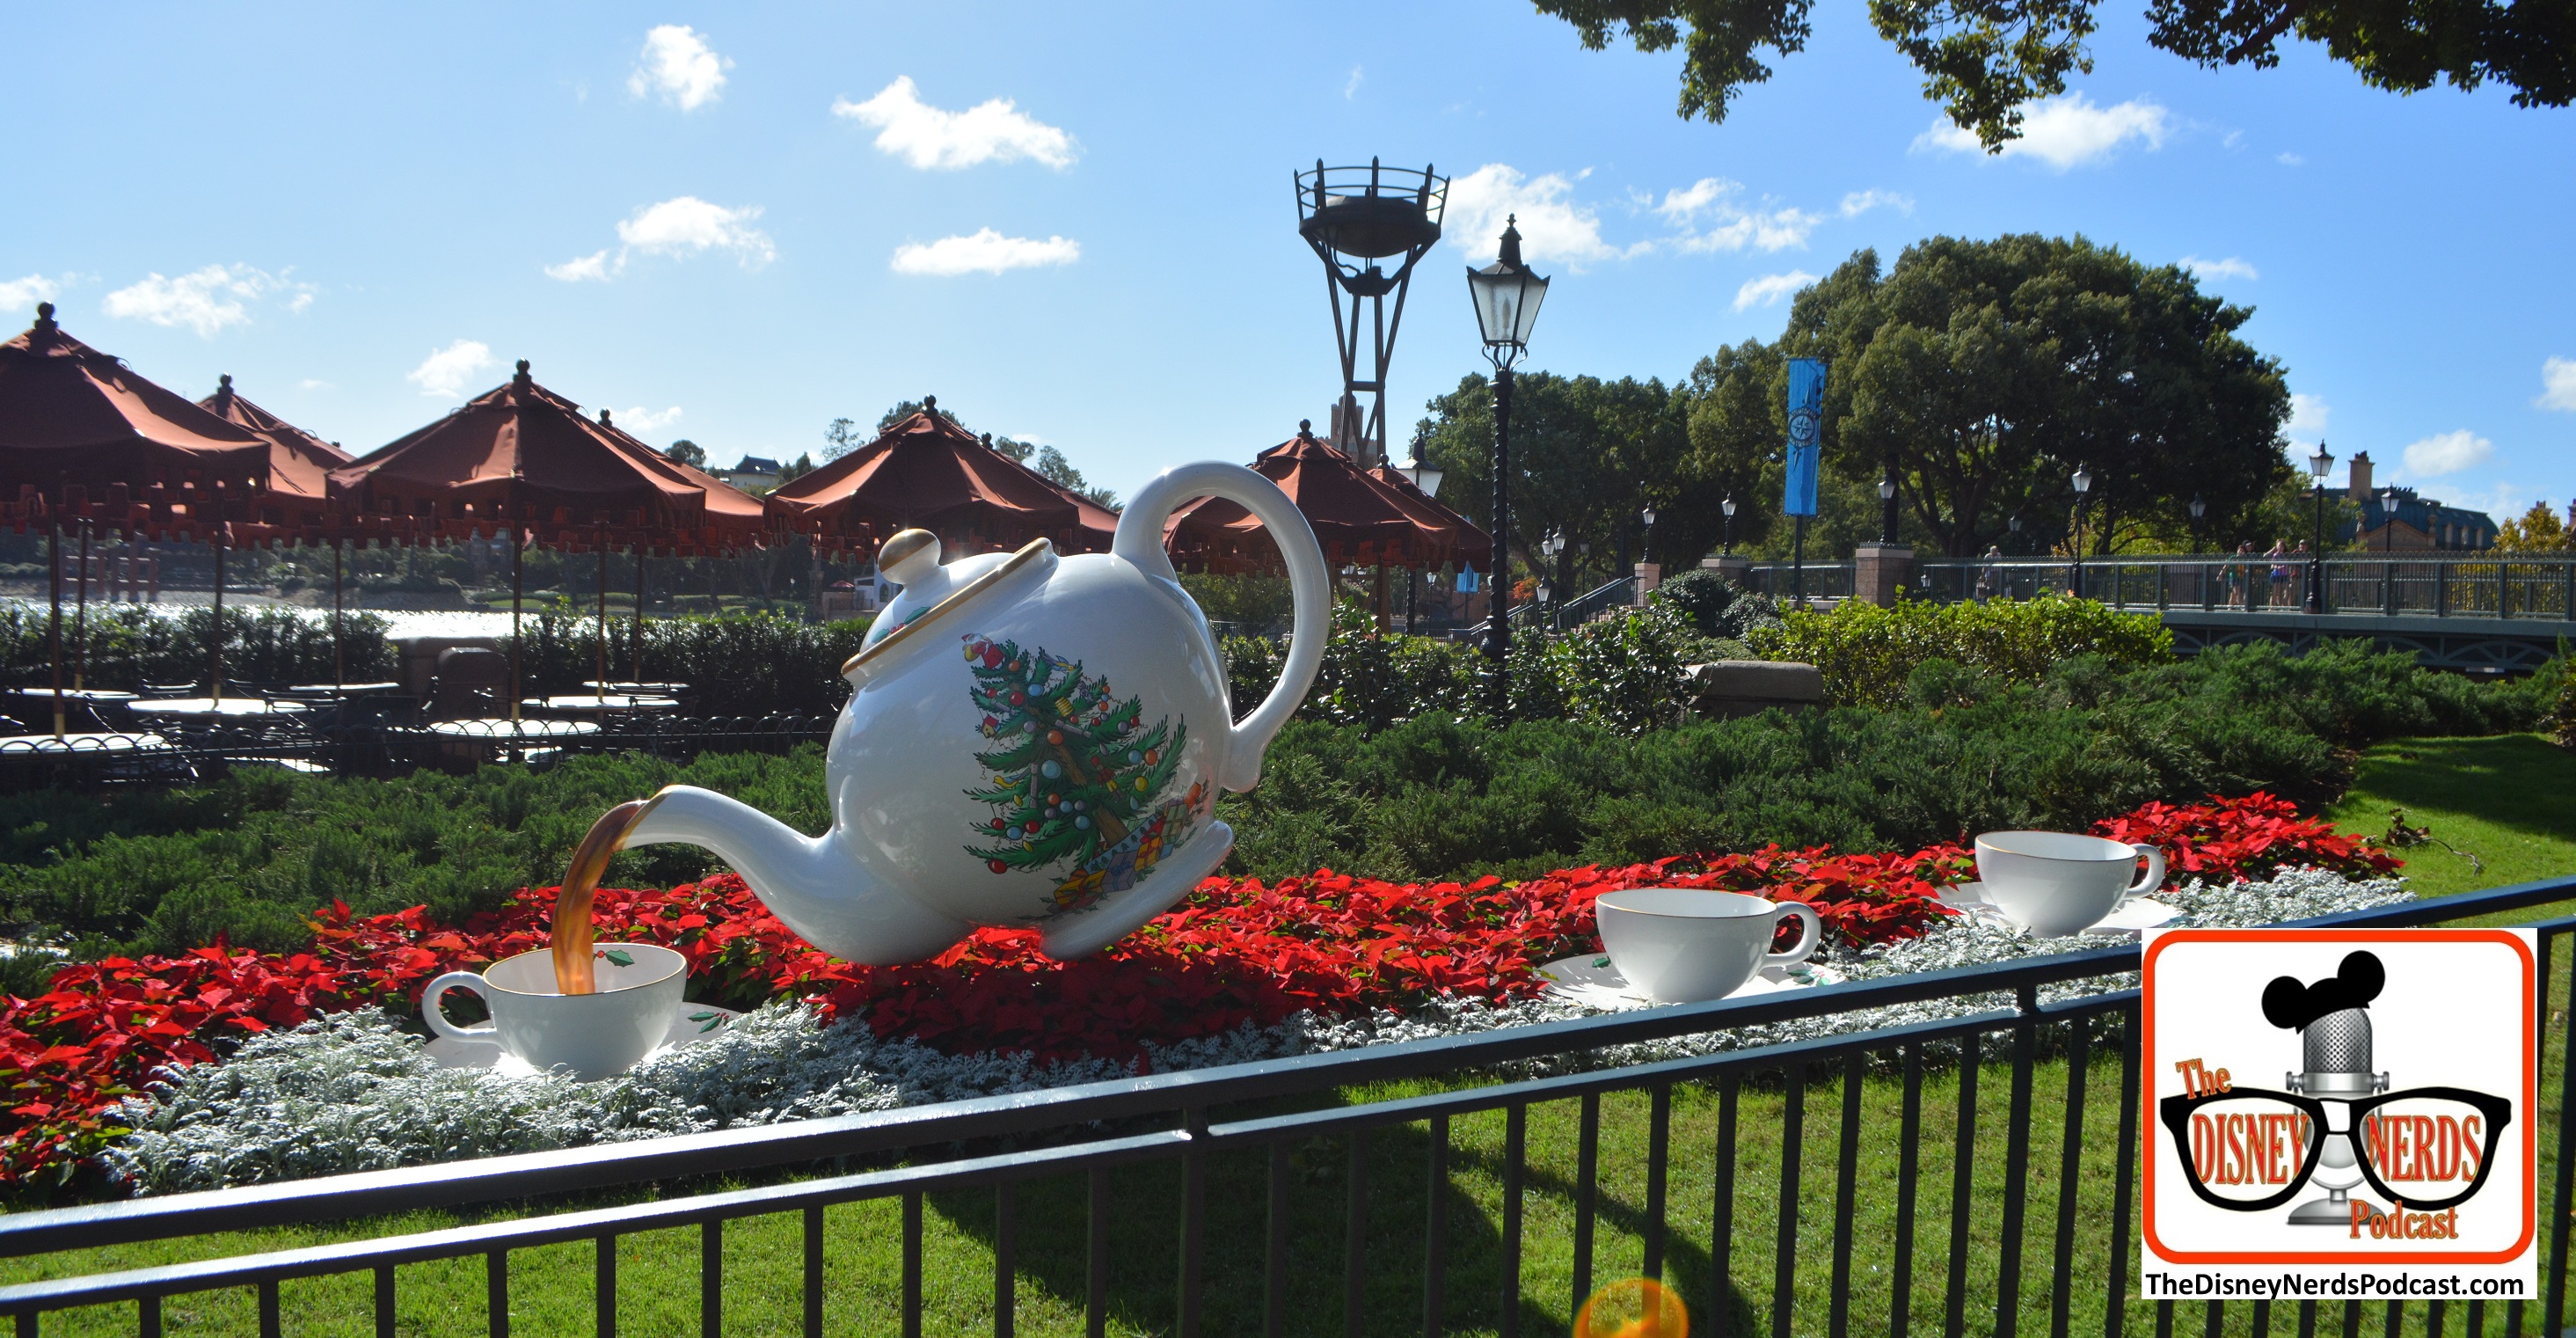 2015-12 - Epcot - Holidays Around the World in united Kingdom featured a giant Christmas tea pot